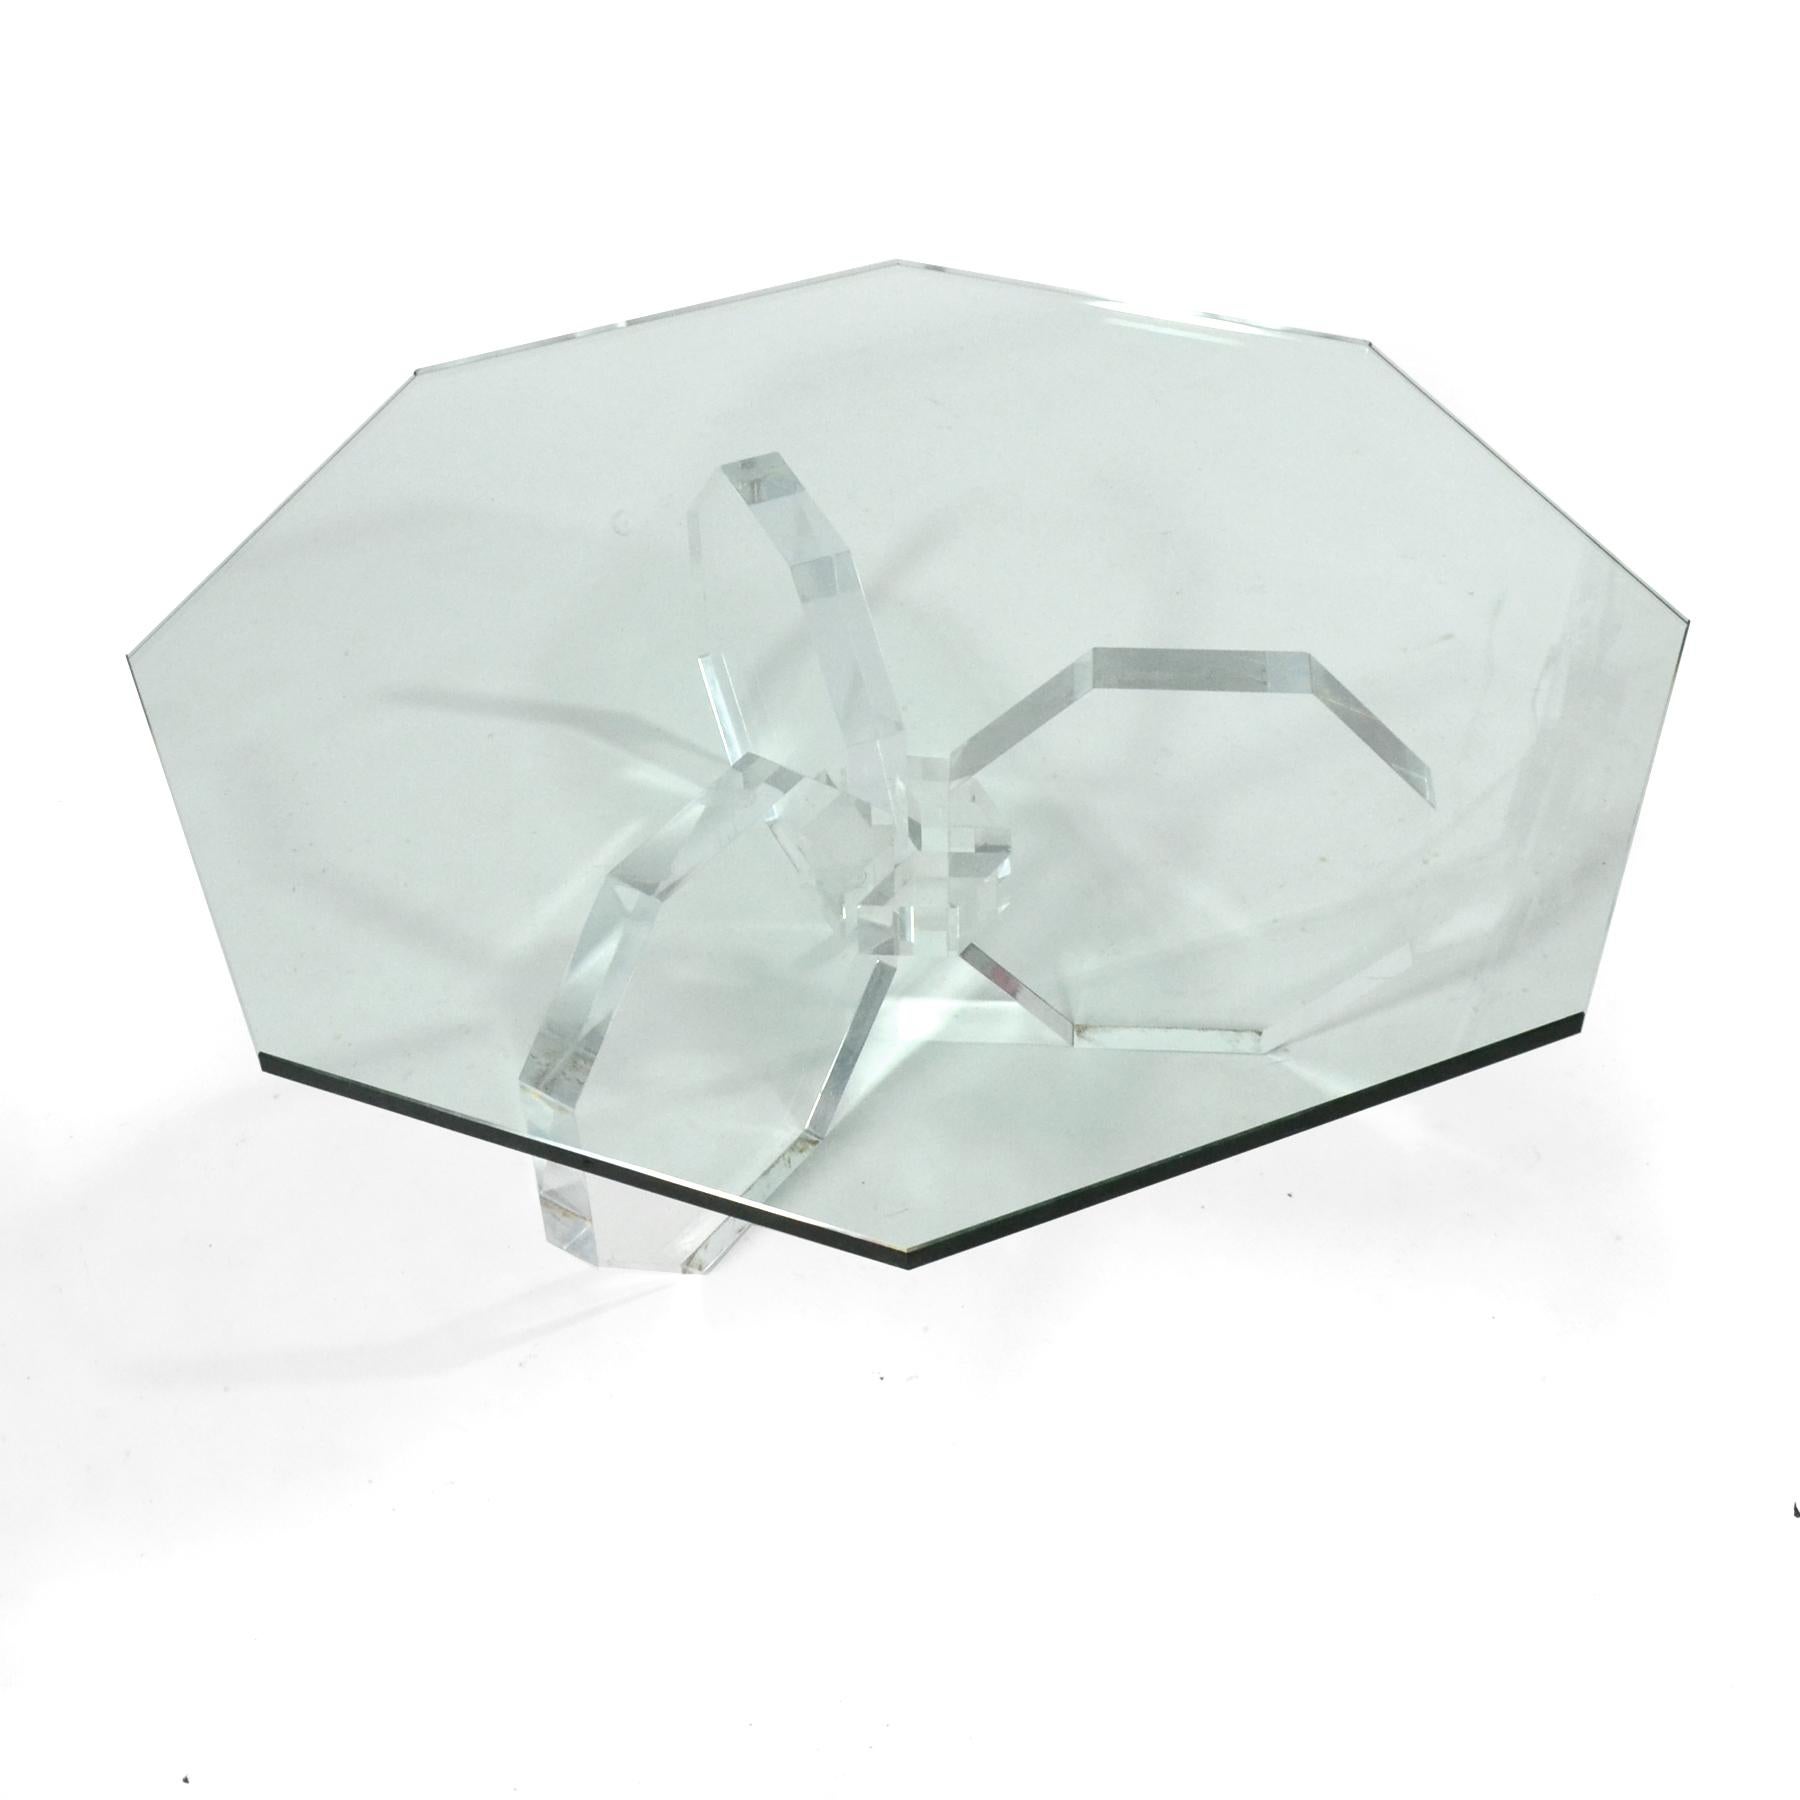 This striking coffee table has an acrylic three-legged base that echoes the octagonal shape of the glass top.